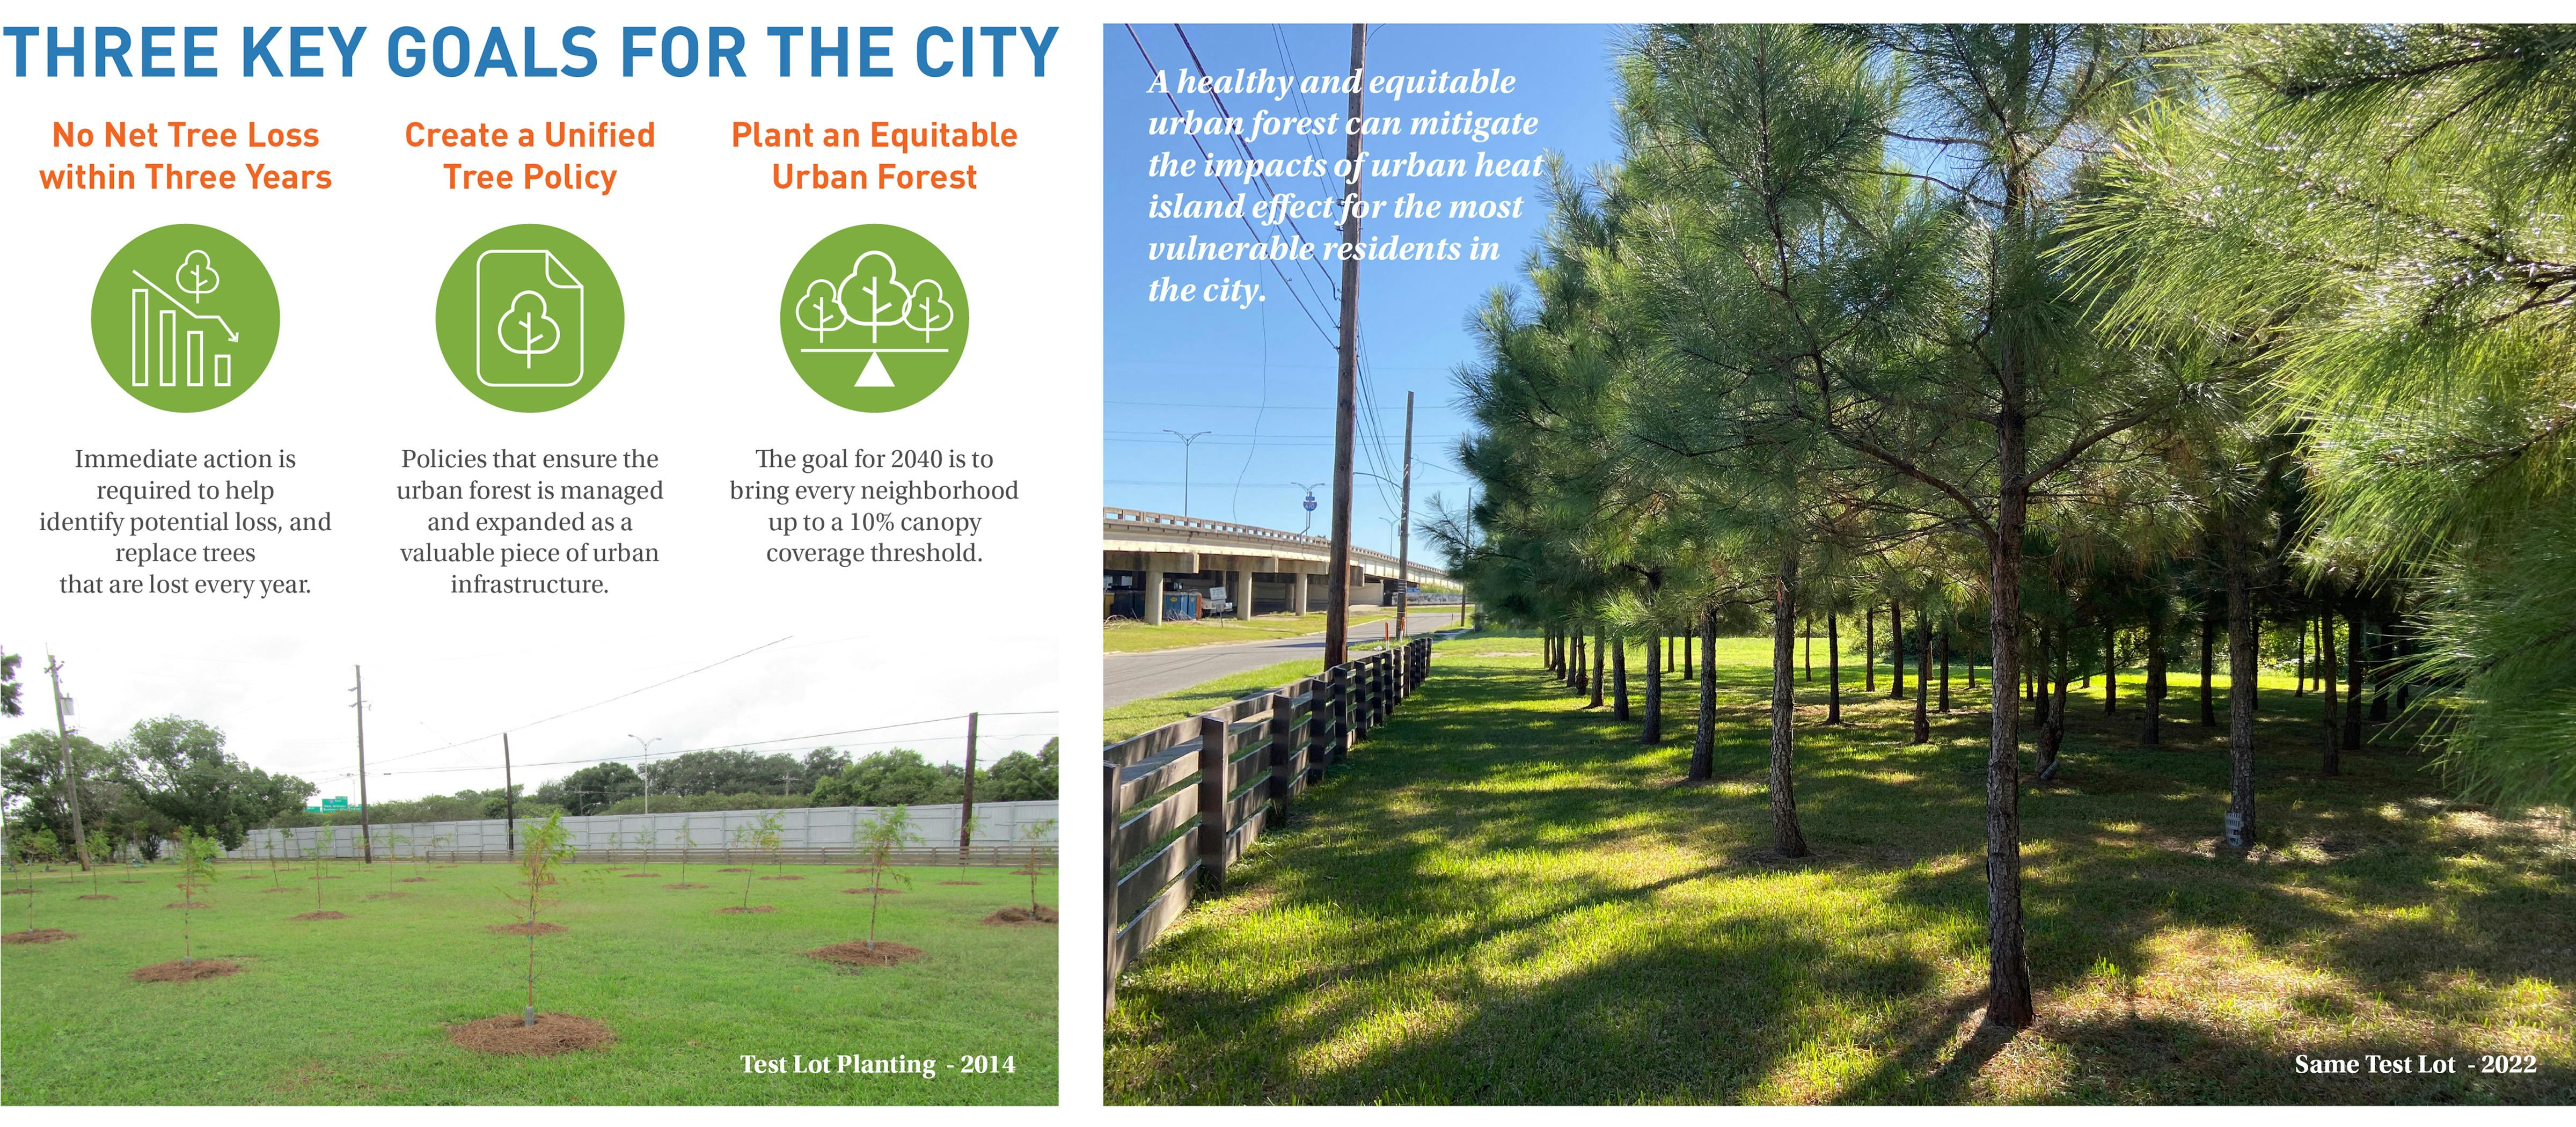 The reforestation plan sets three key goals for the city; no net tree loss within three years, create a unified tree policy, and to plant an equitable urban forest.